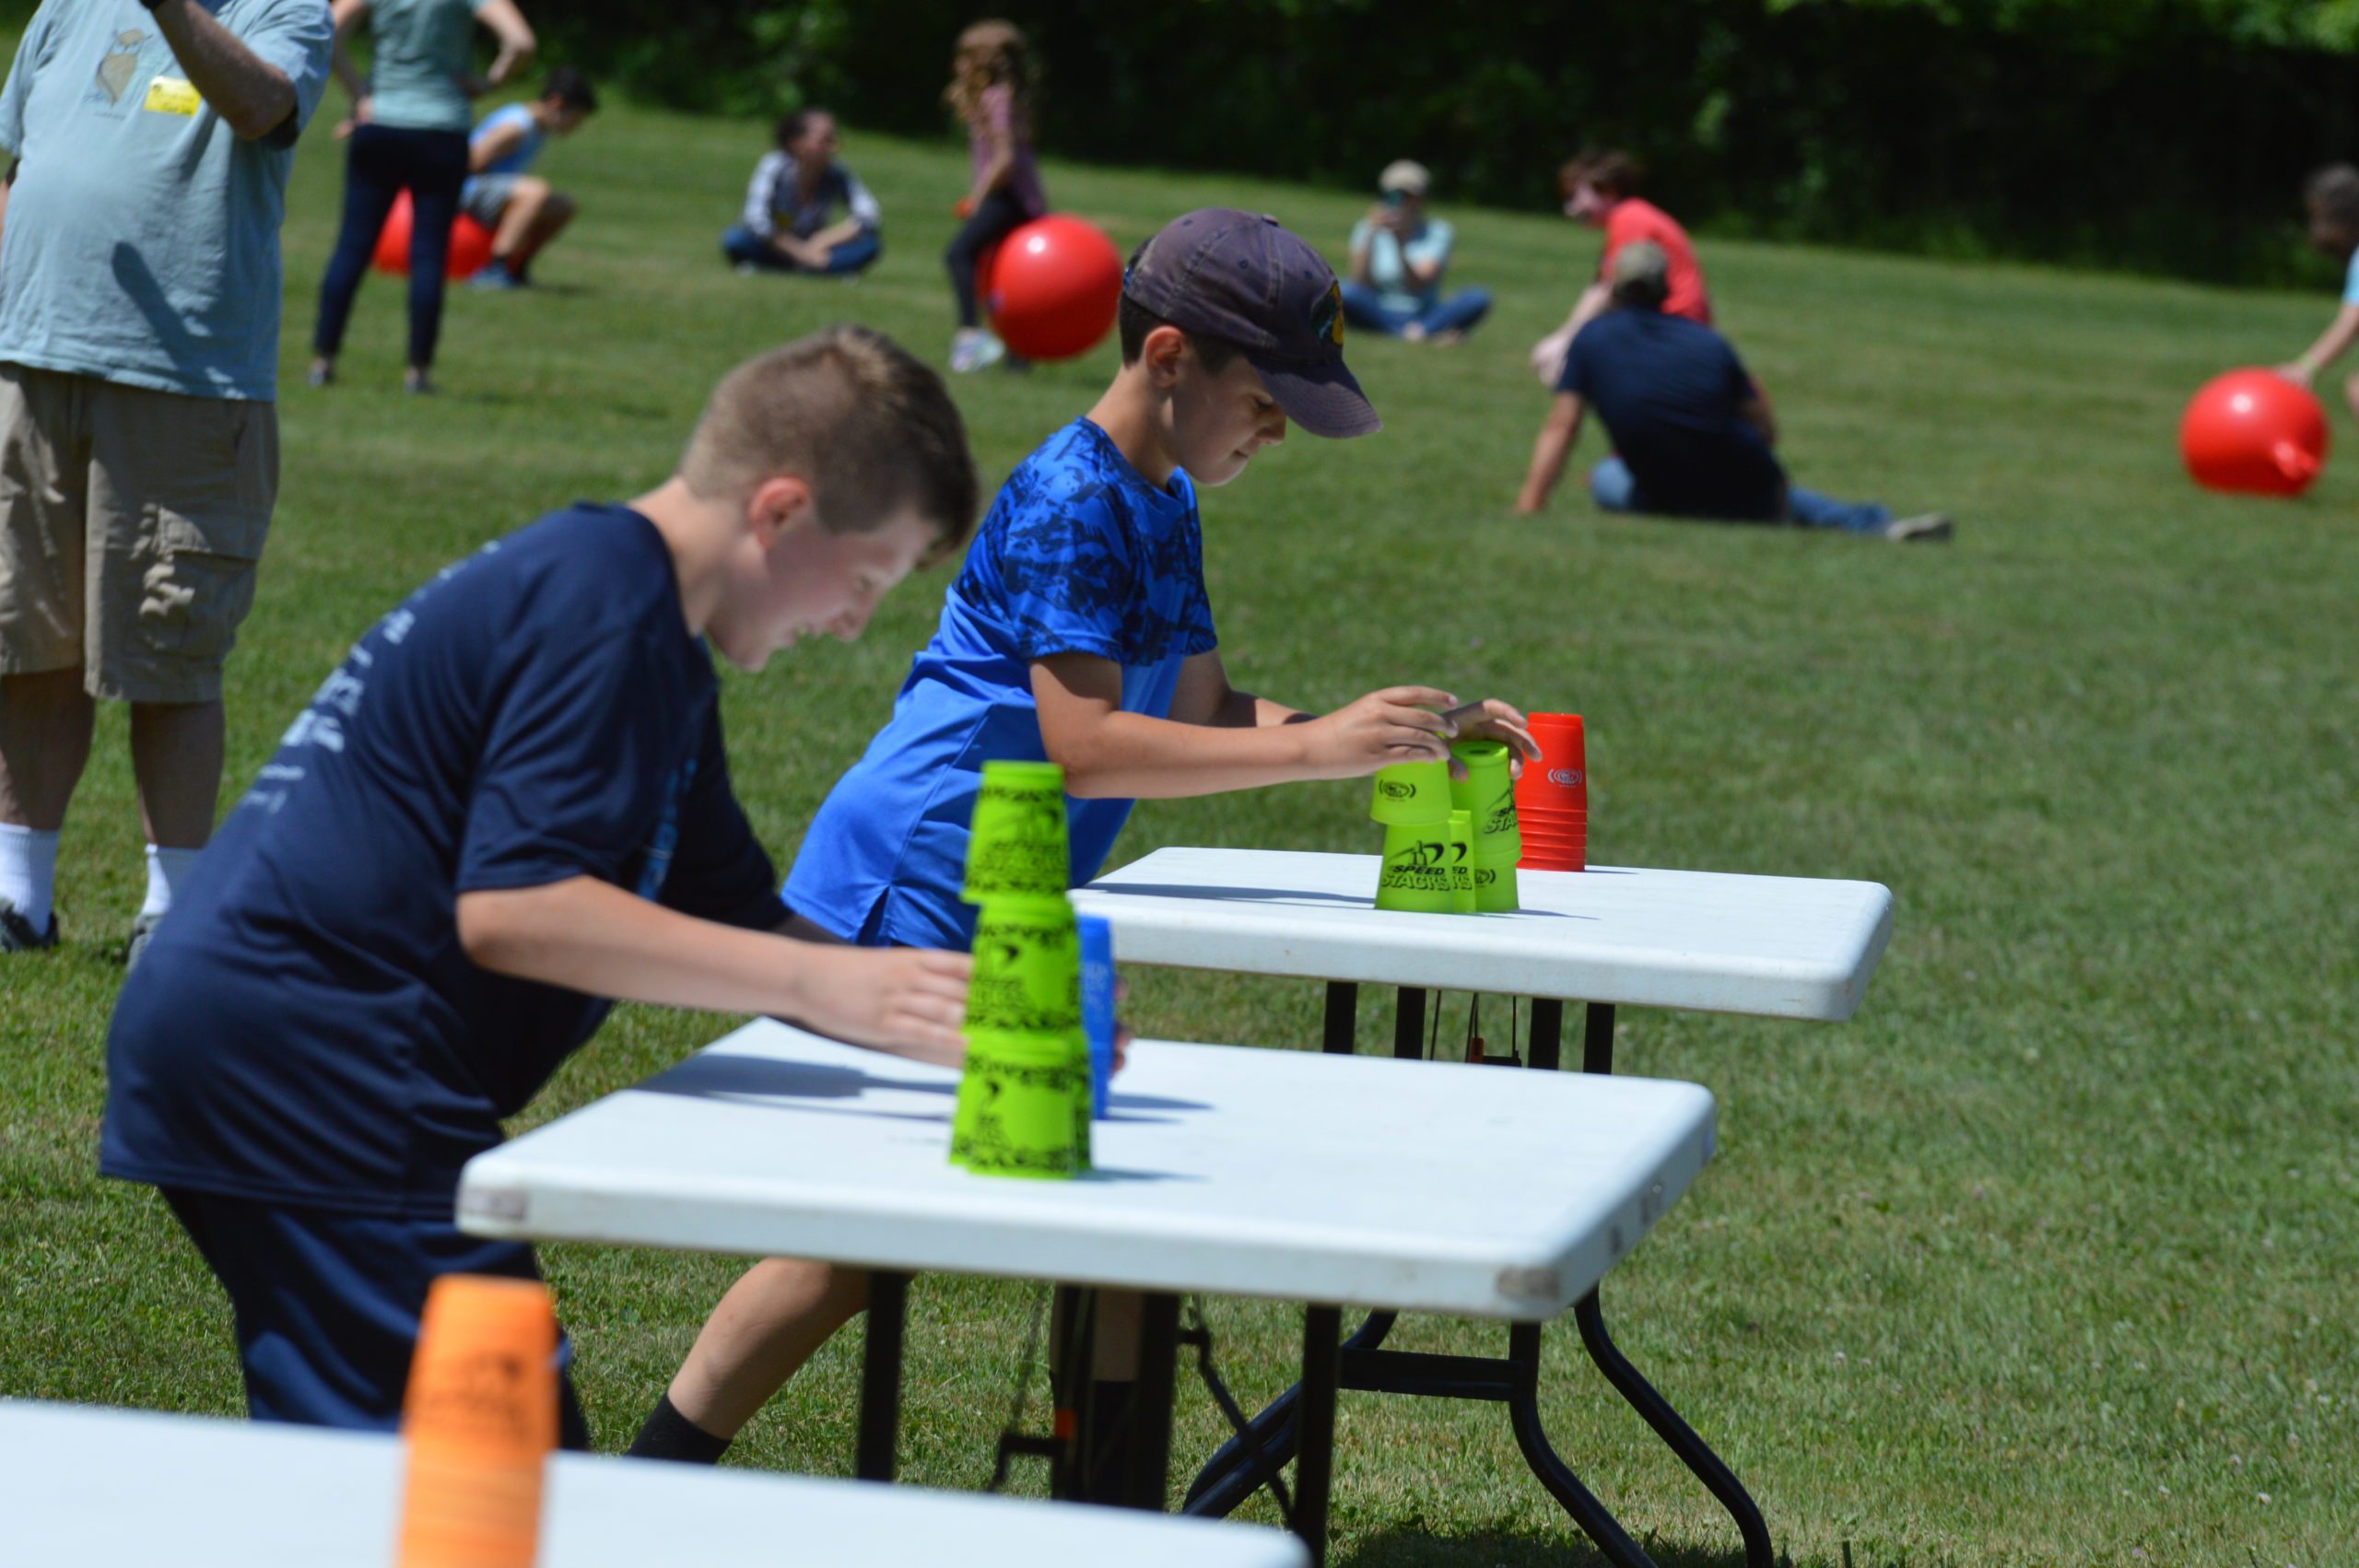 Students stacking cups at Field Day